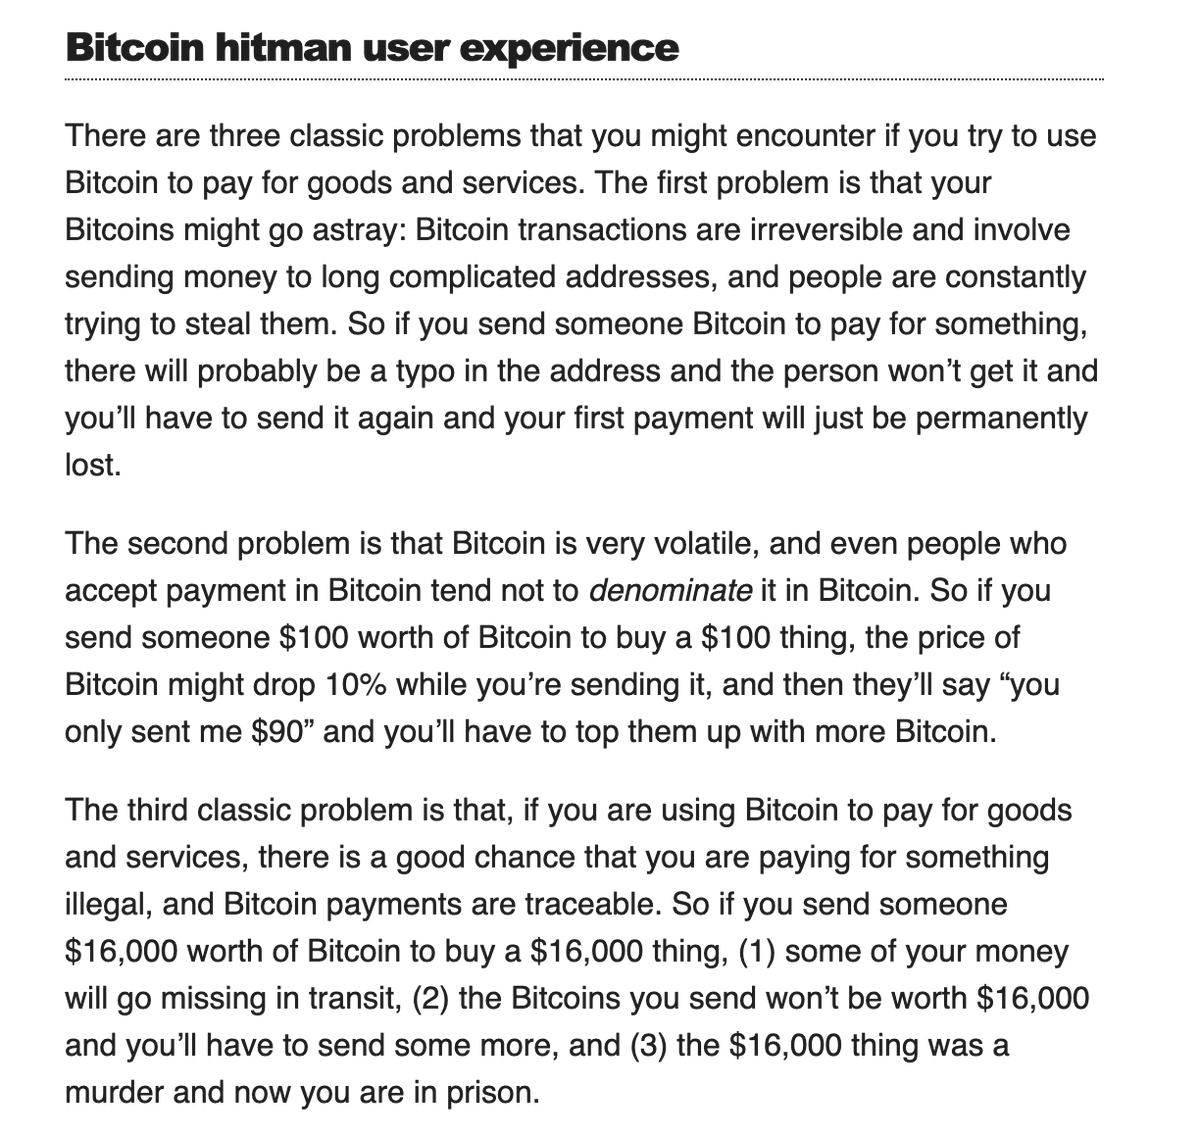 It seems Matt Levine has a circa-2012 view of Bitcoin, and that honestly explains a lot of his musings on crypto generally.